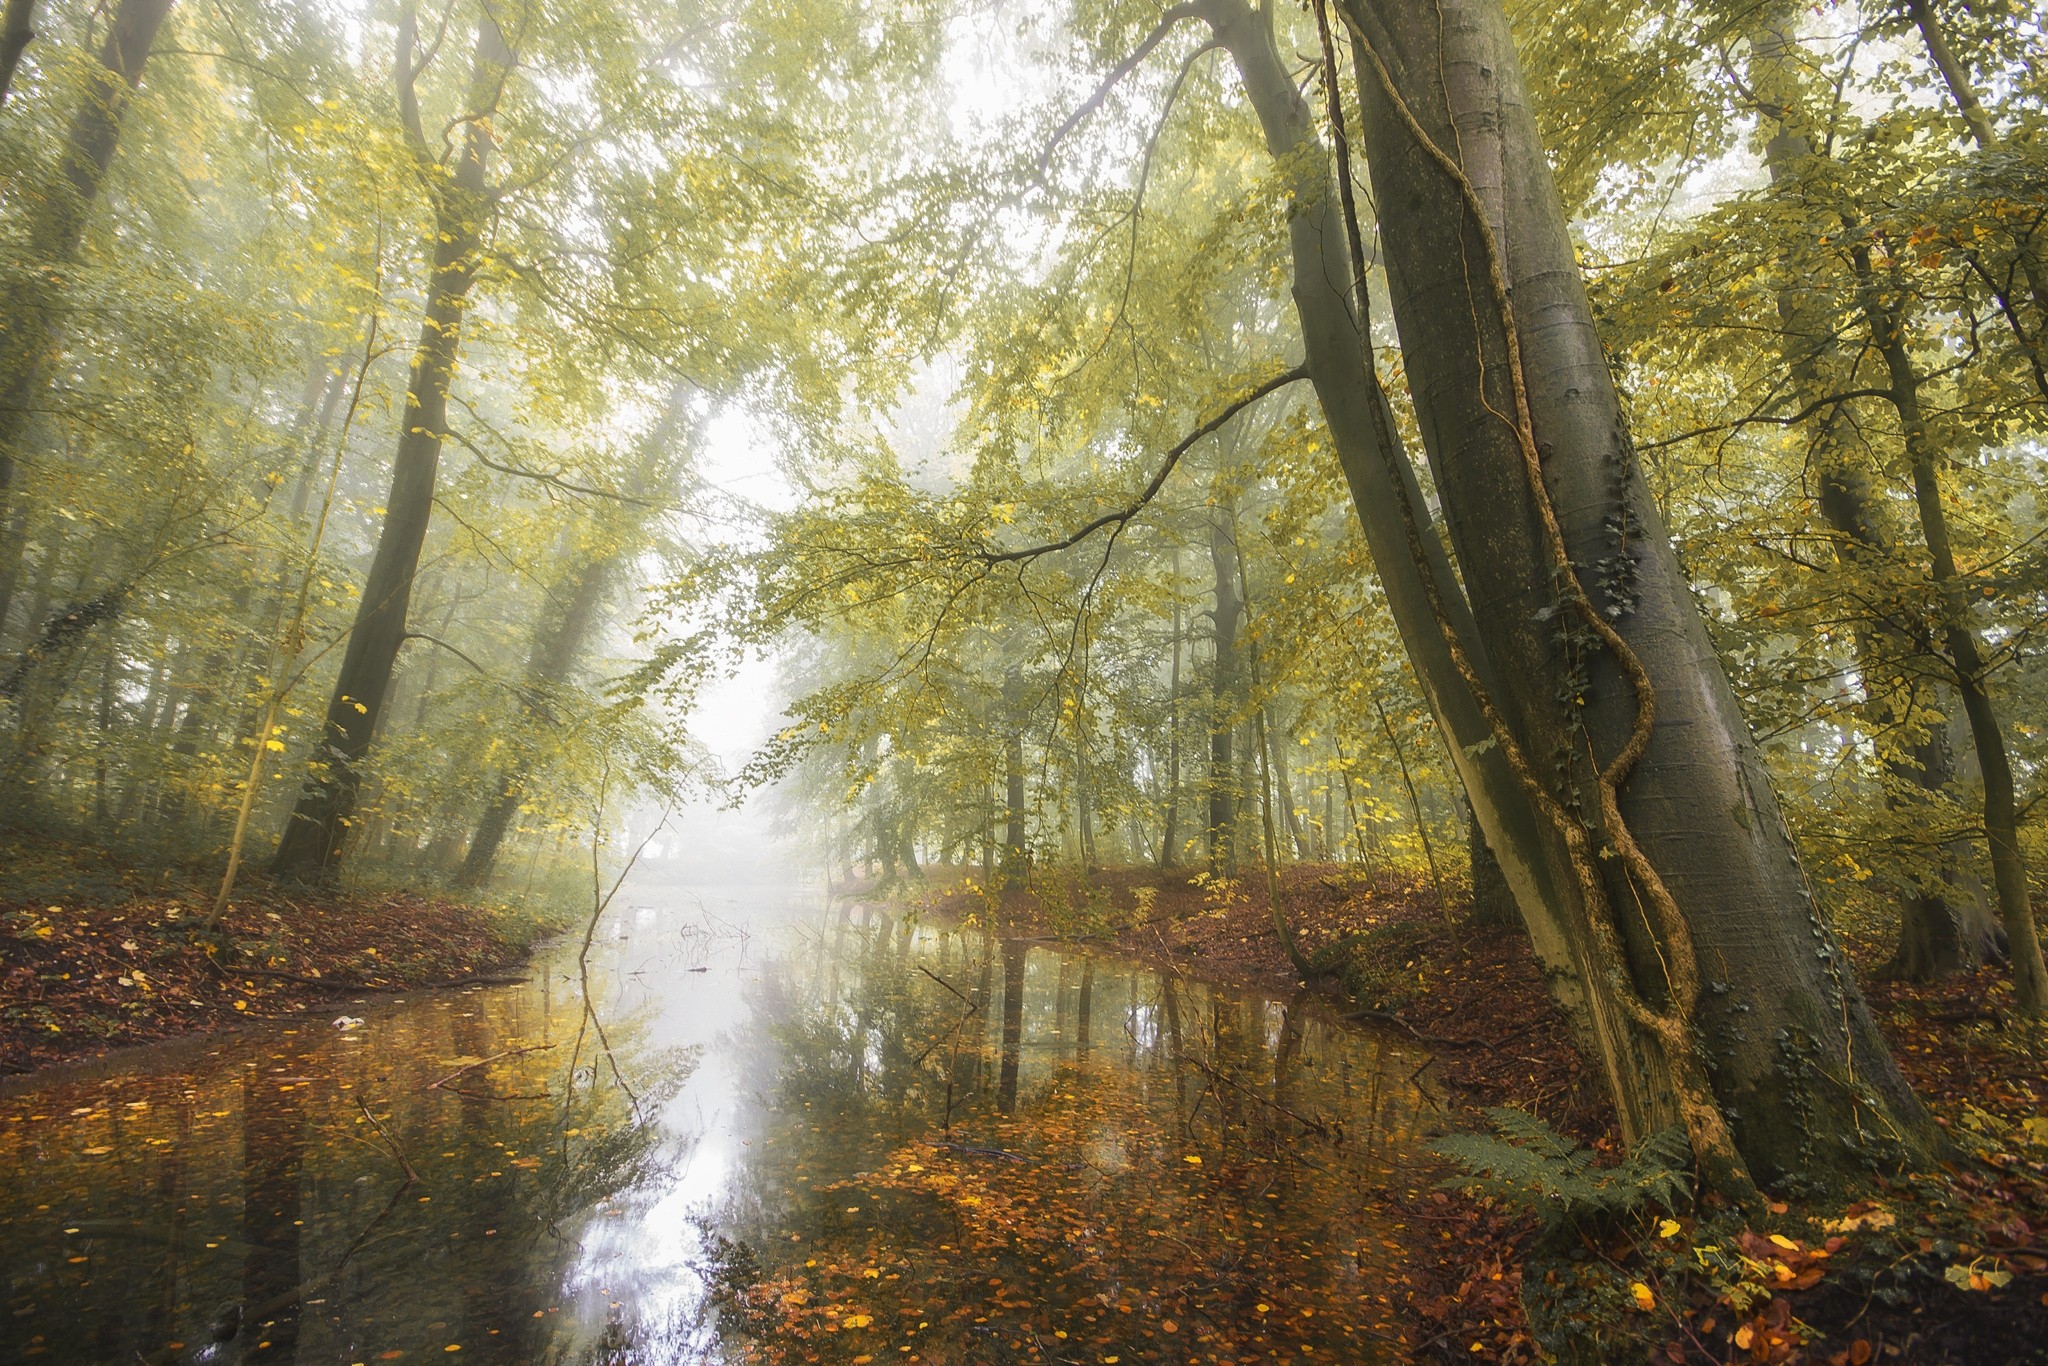 General 2048x1366 nature pond forest fall leaves mist morning daylight trees Germany